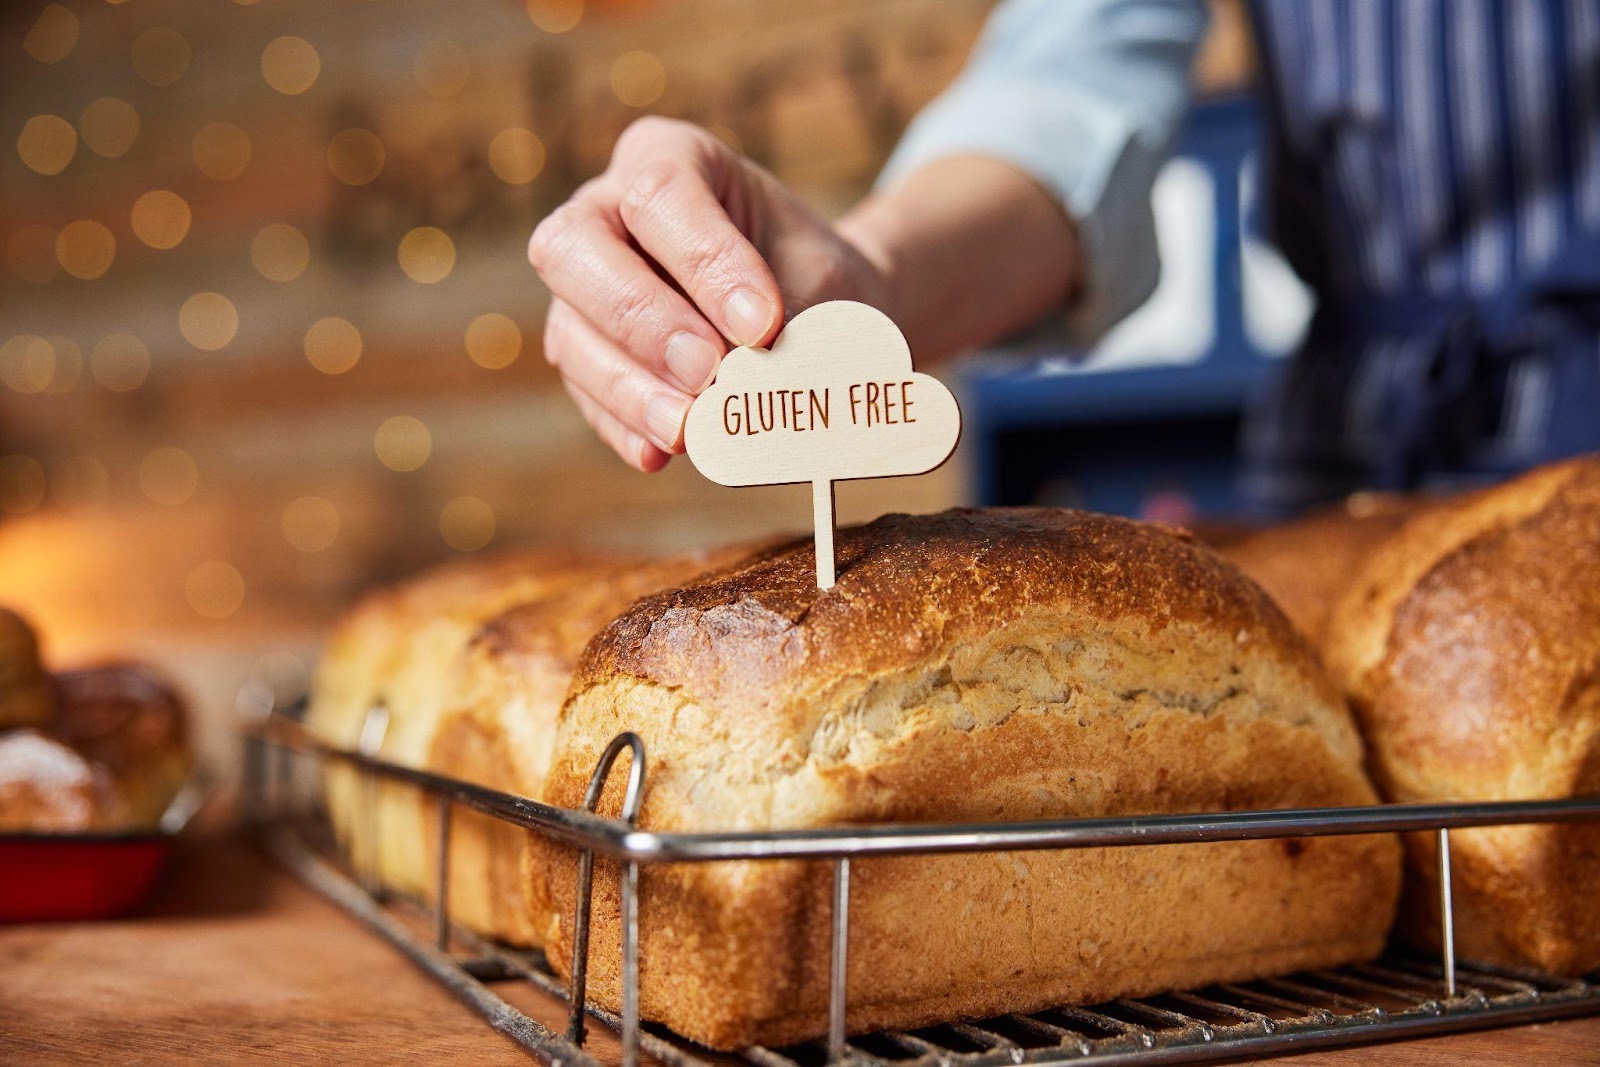 6 Things to Know About Going Gluten-Free